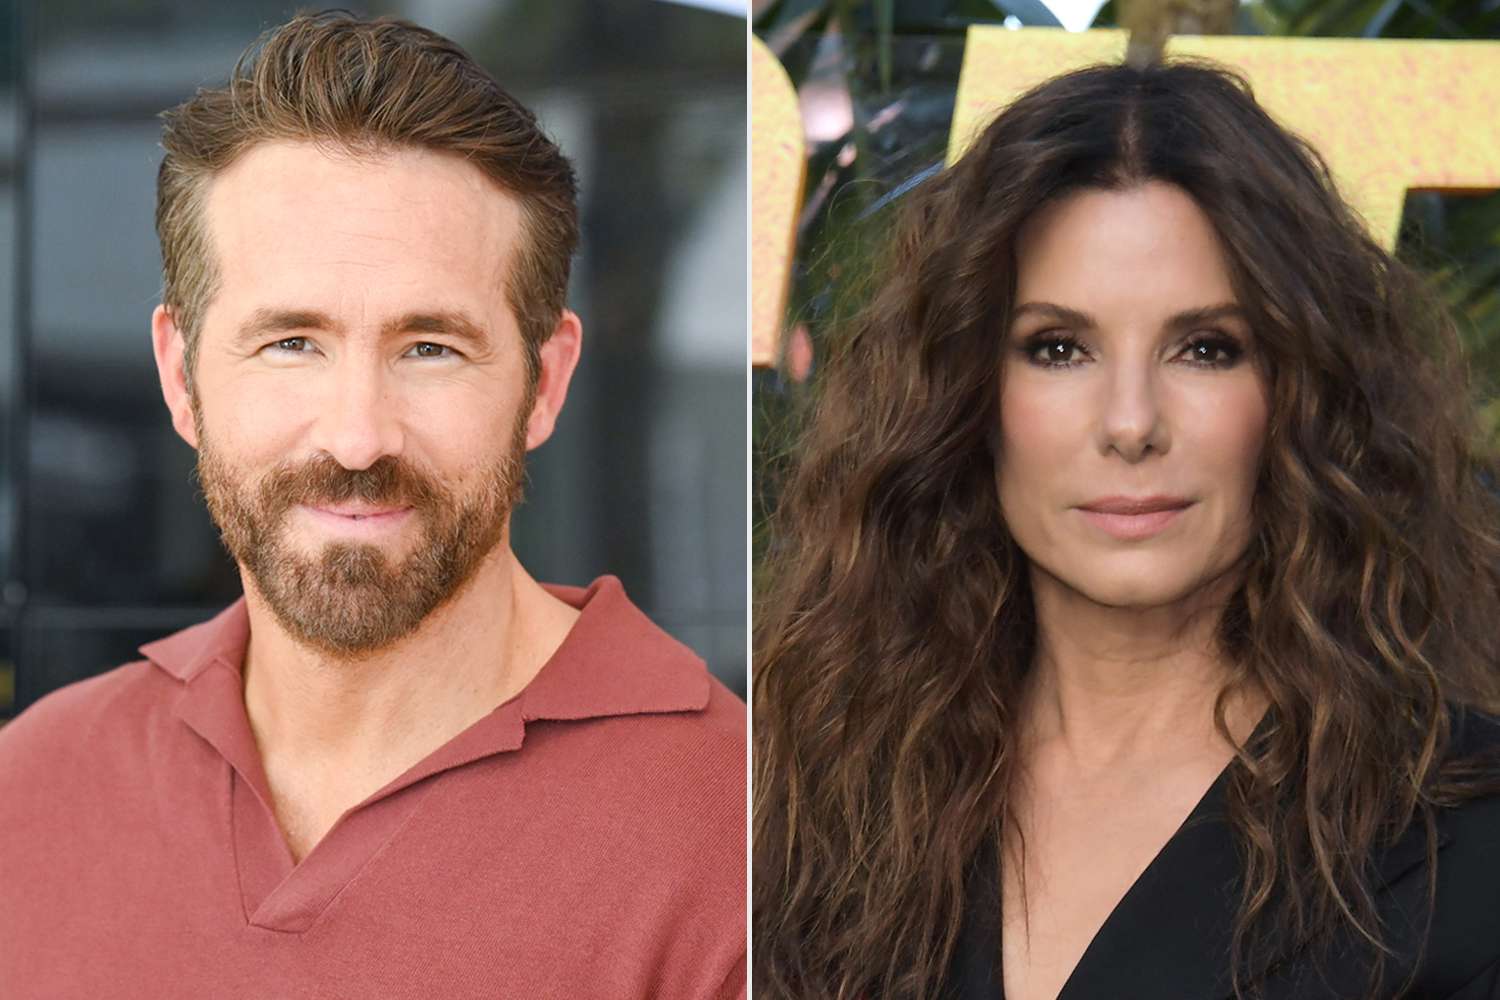 Ryan Reynolds Surprises Sandra Bullock with Steamy Birthday Gift - You Won't Believe What It Is! 14